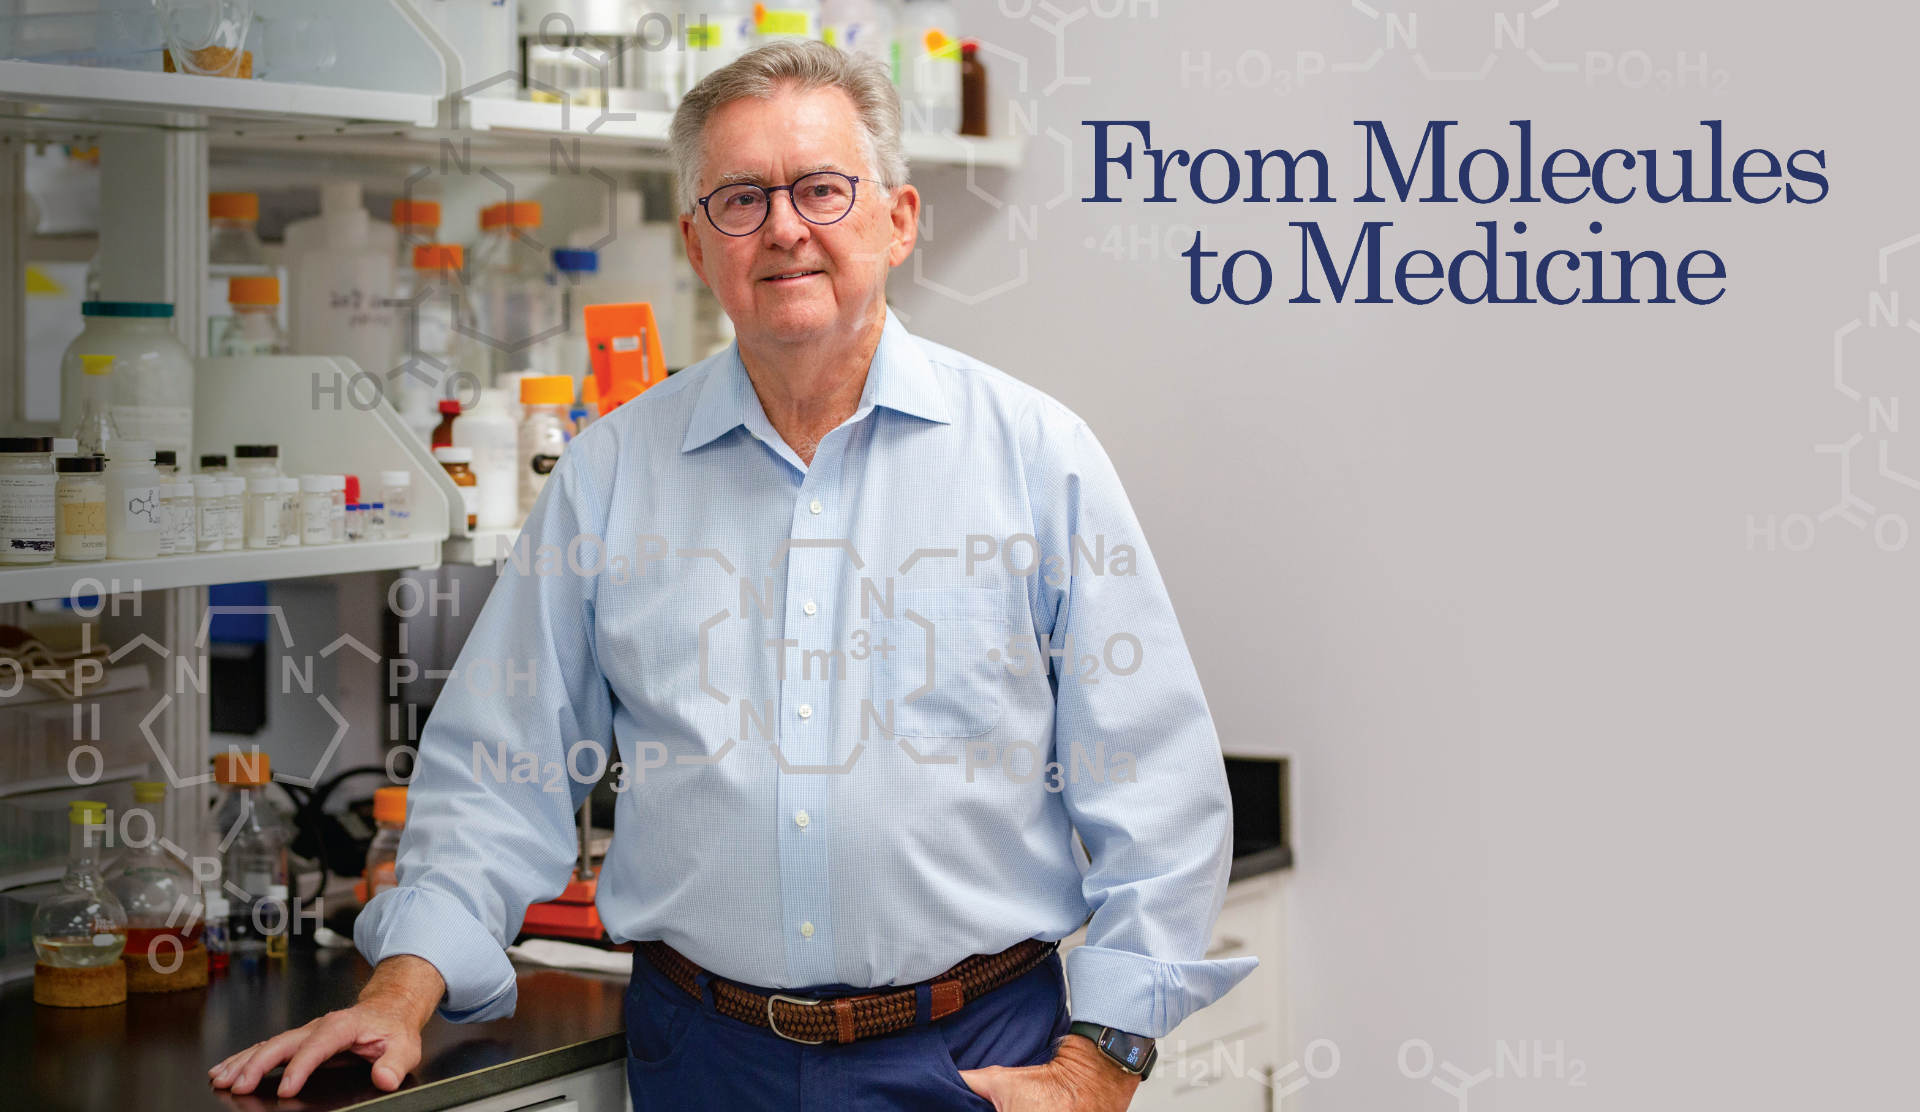 From Molecules to Medicine